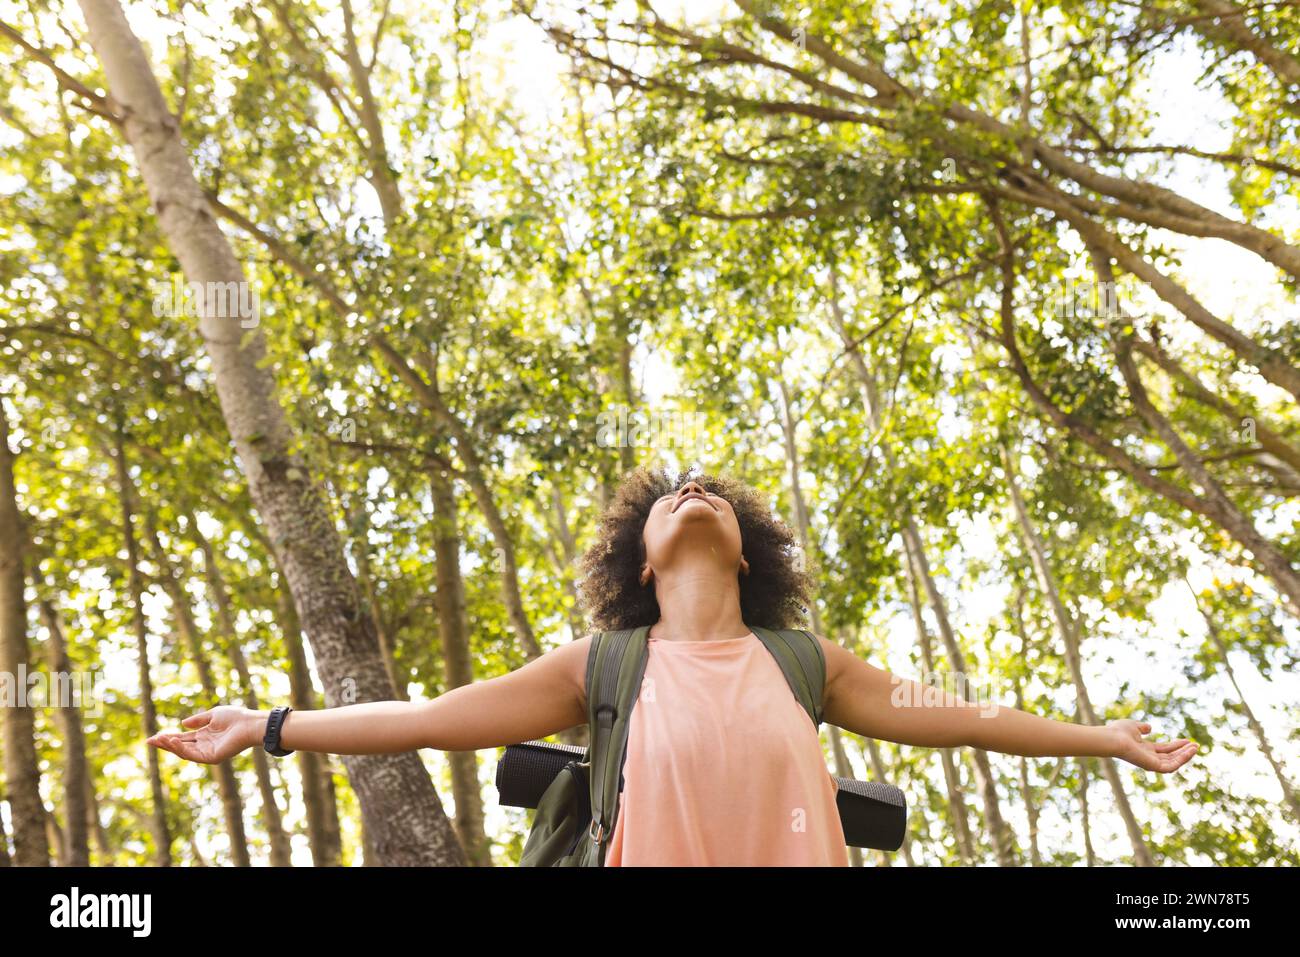 Young biracial woman with arms outstretched, embracing nature in a sunlit forest with copy space Stock Photo